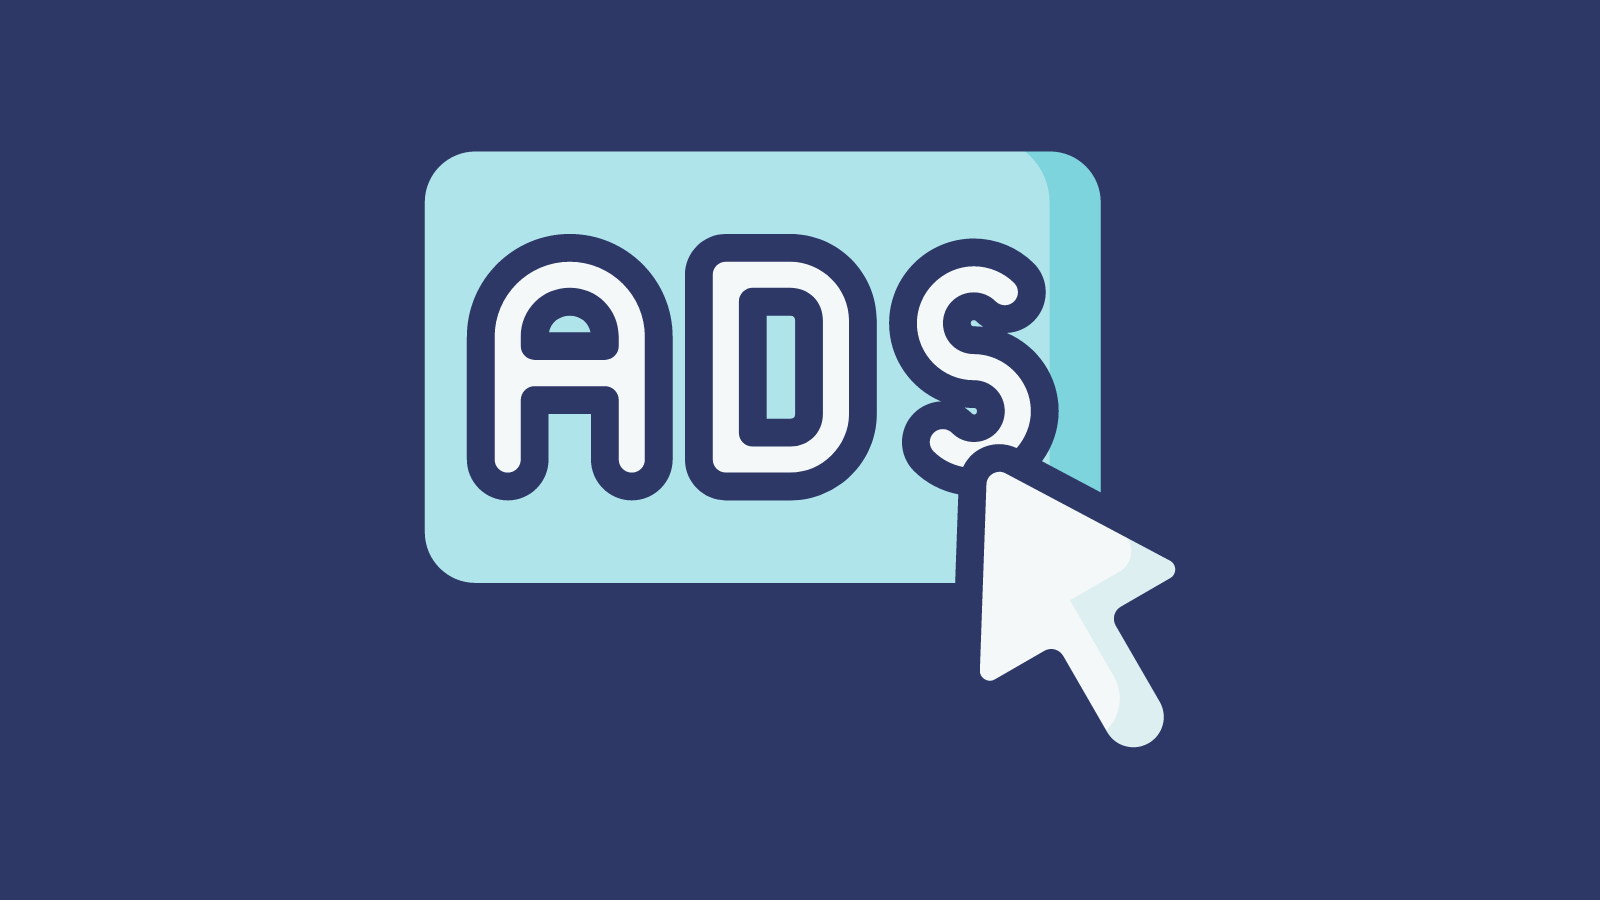 A cursor clicking on a button that says ADS